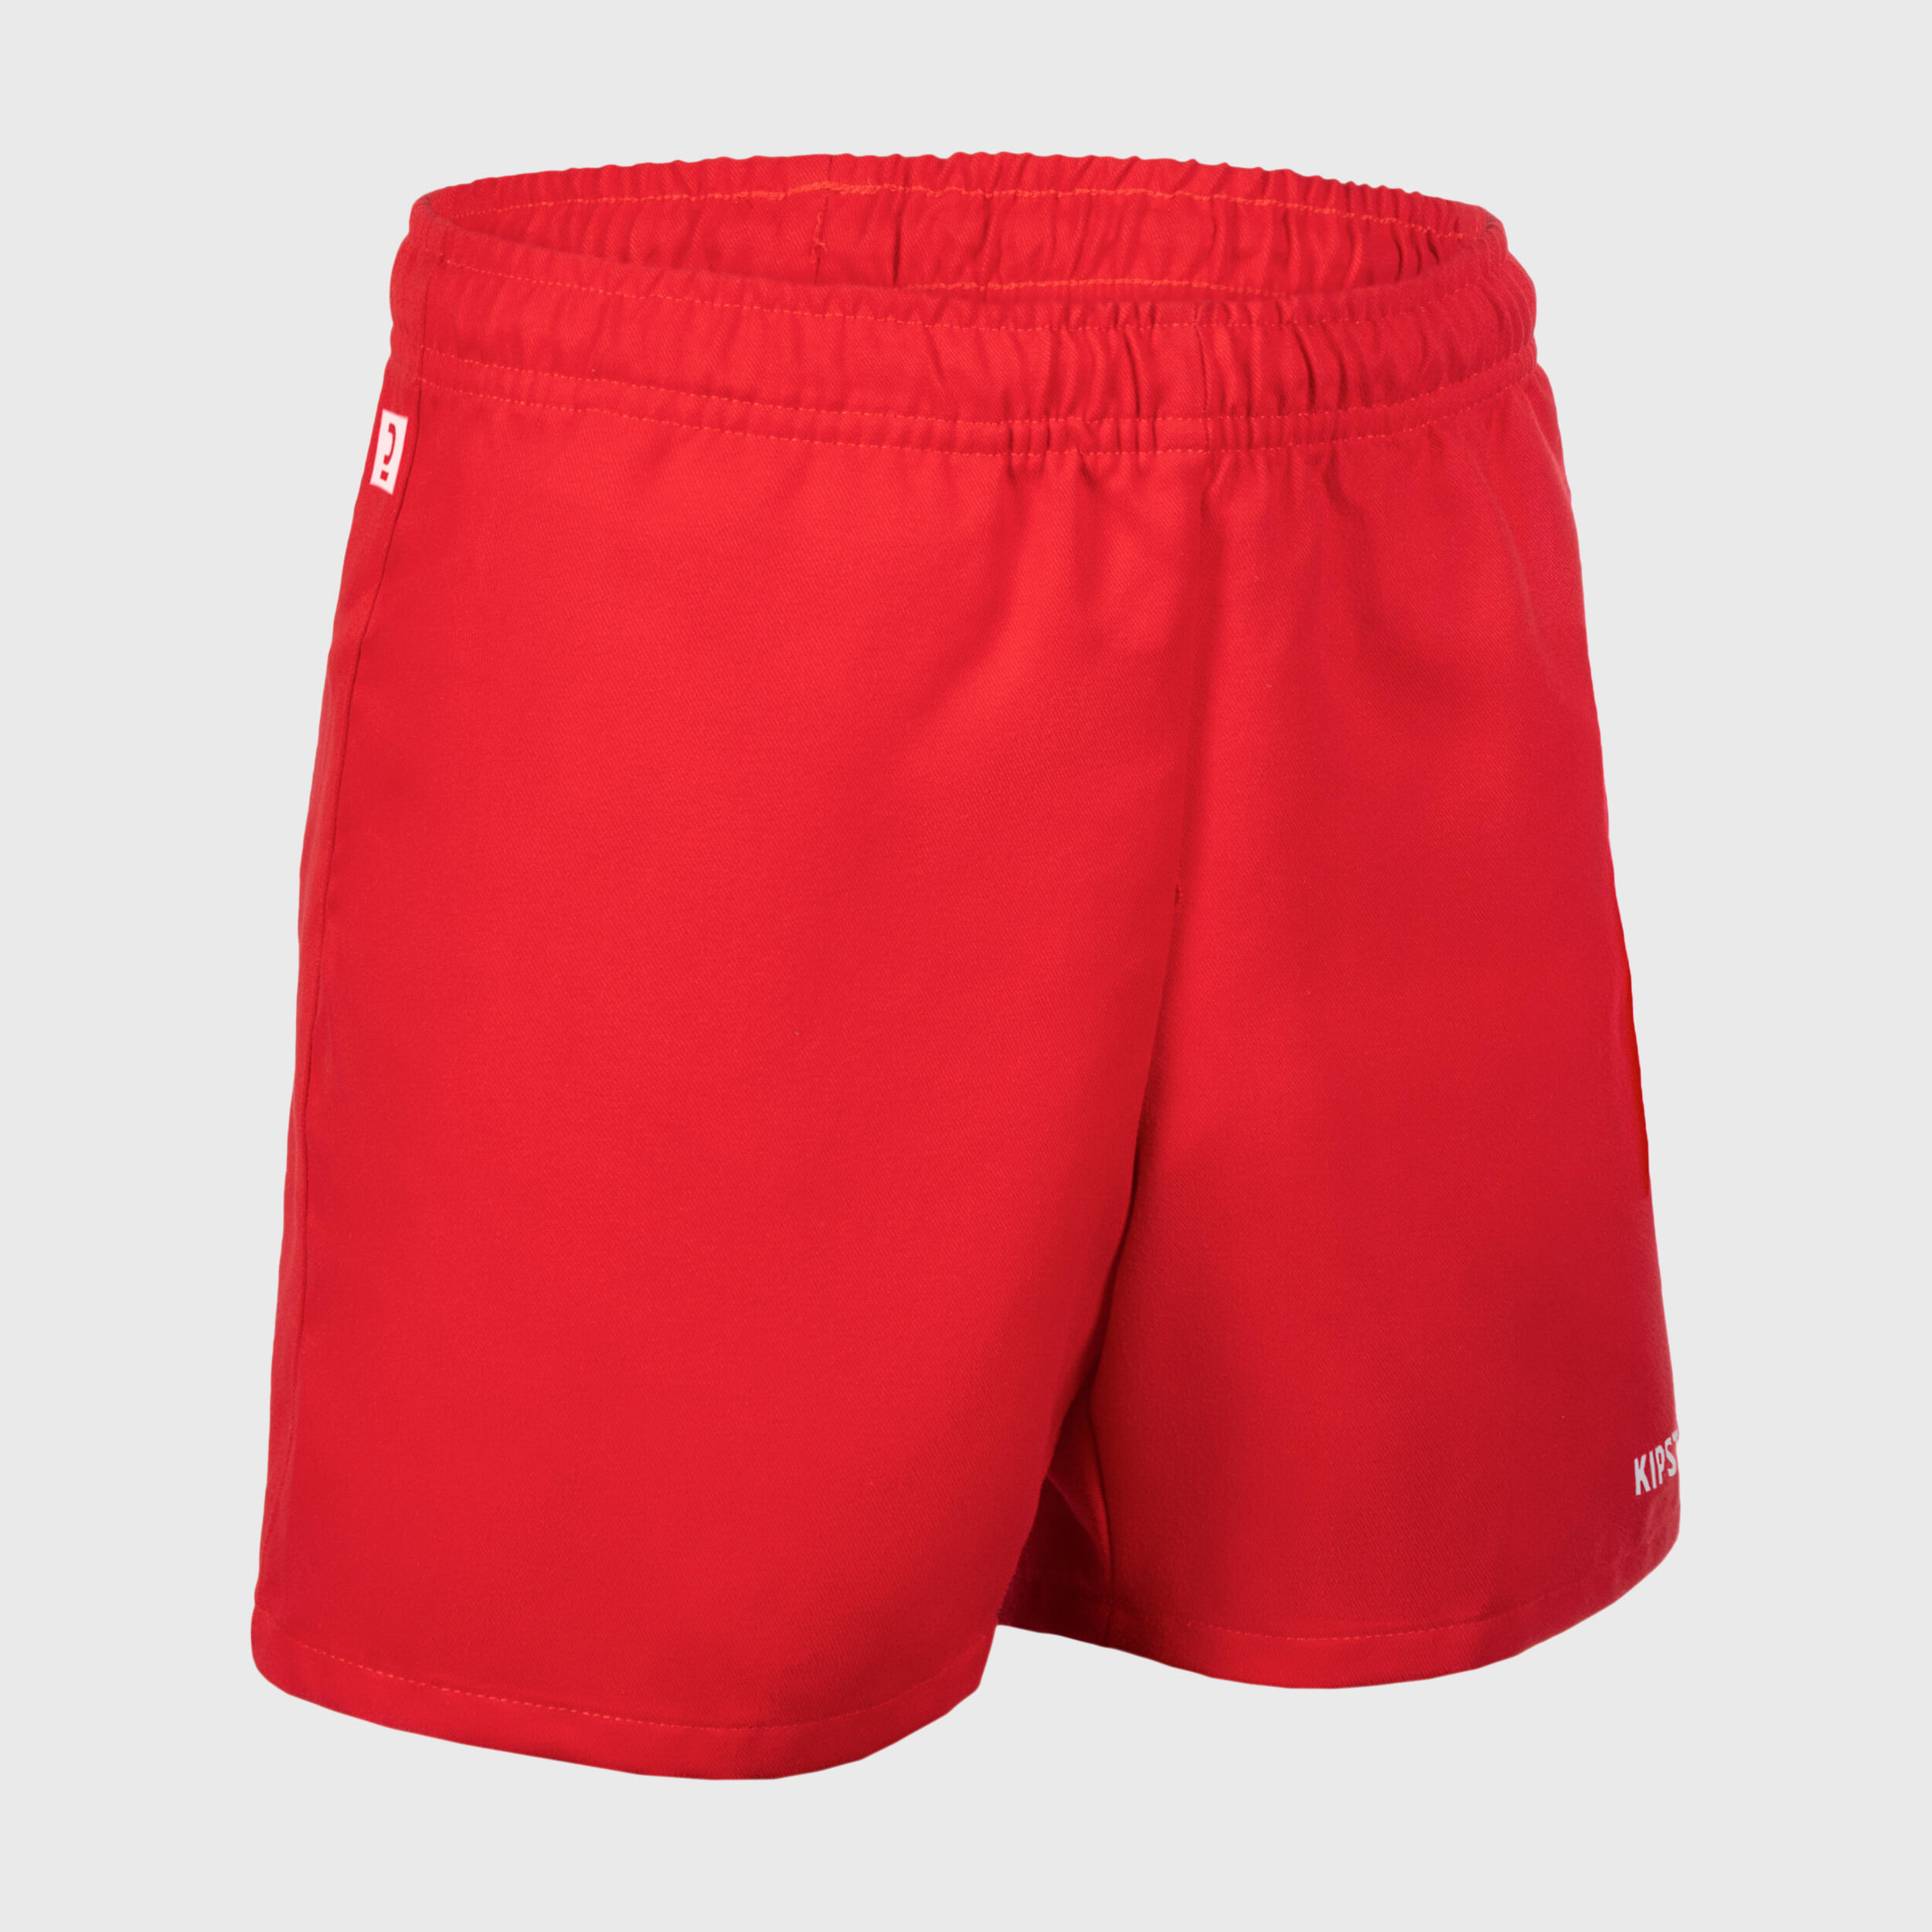 short rugby adulte avec poches r100 rouge - offload